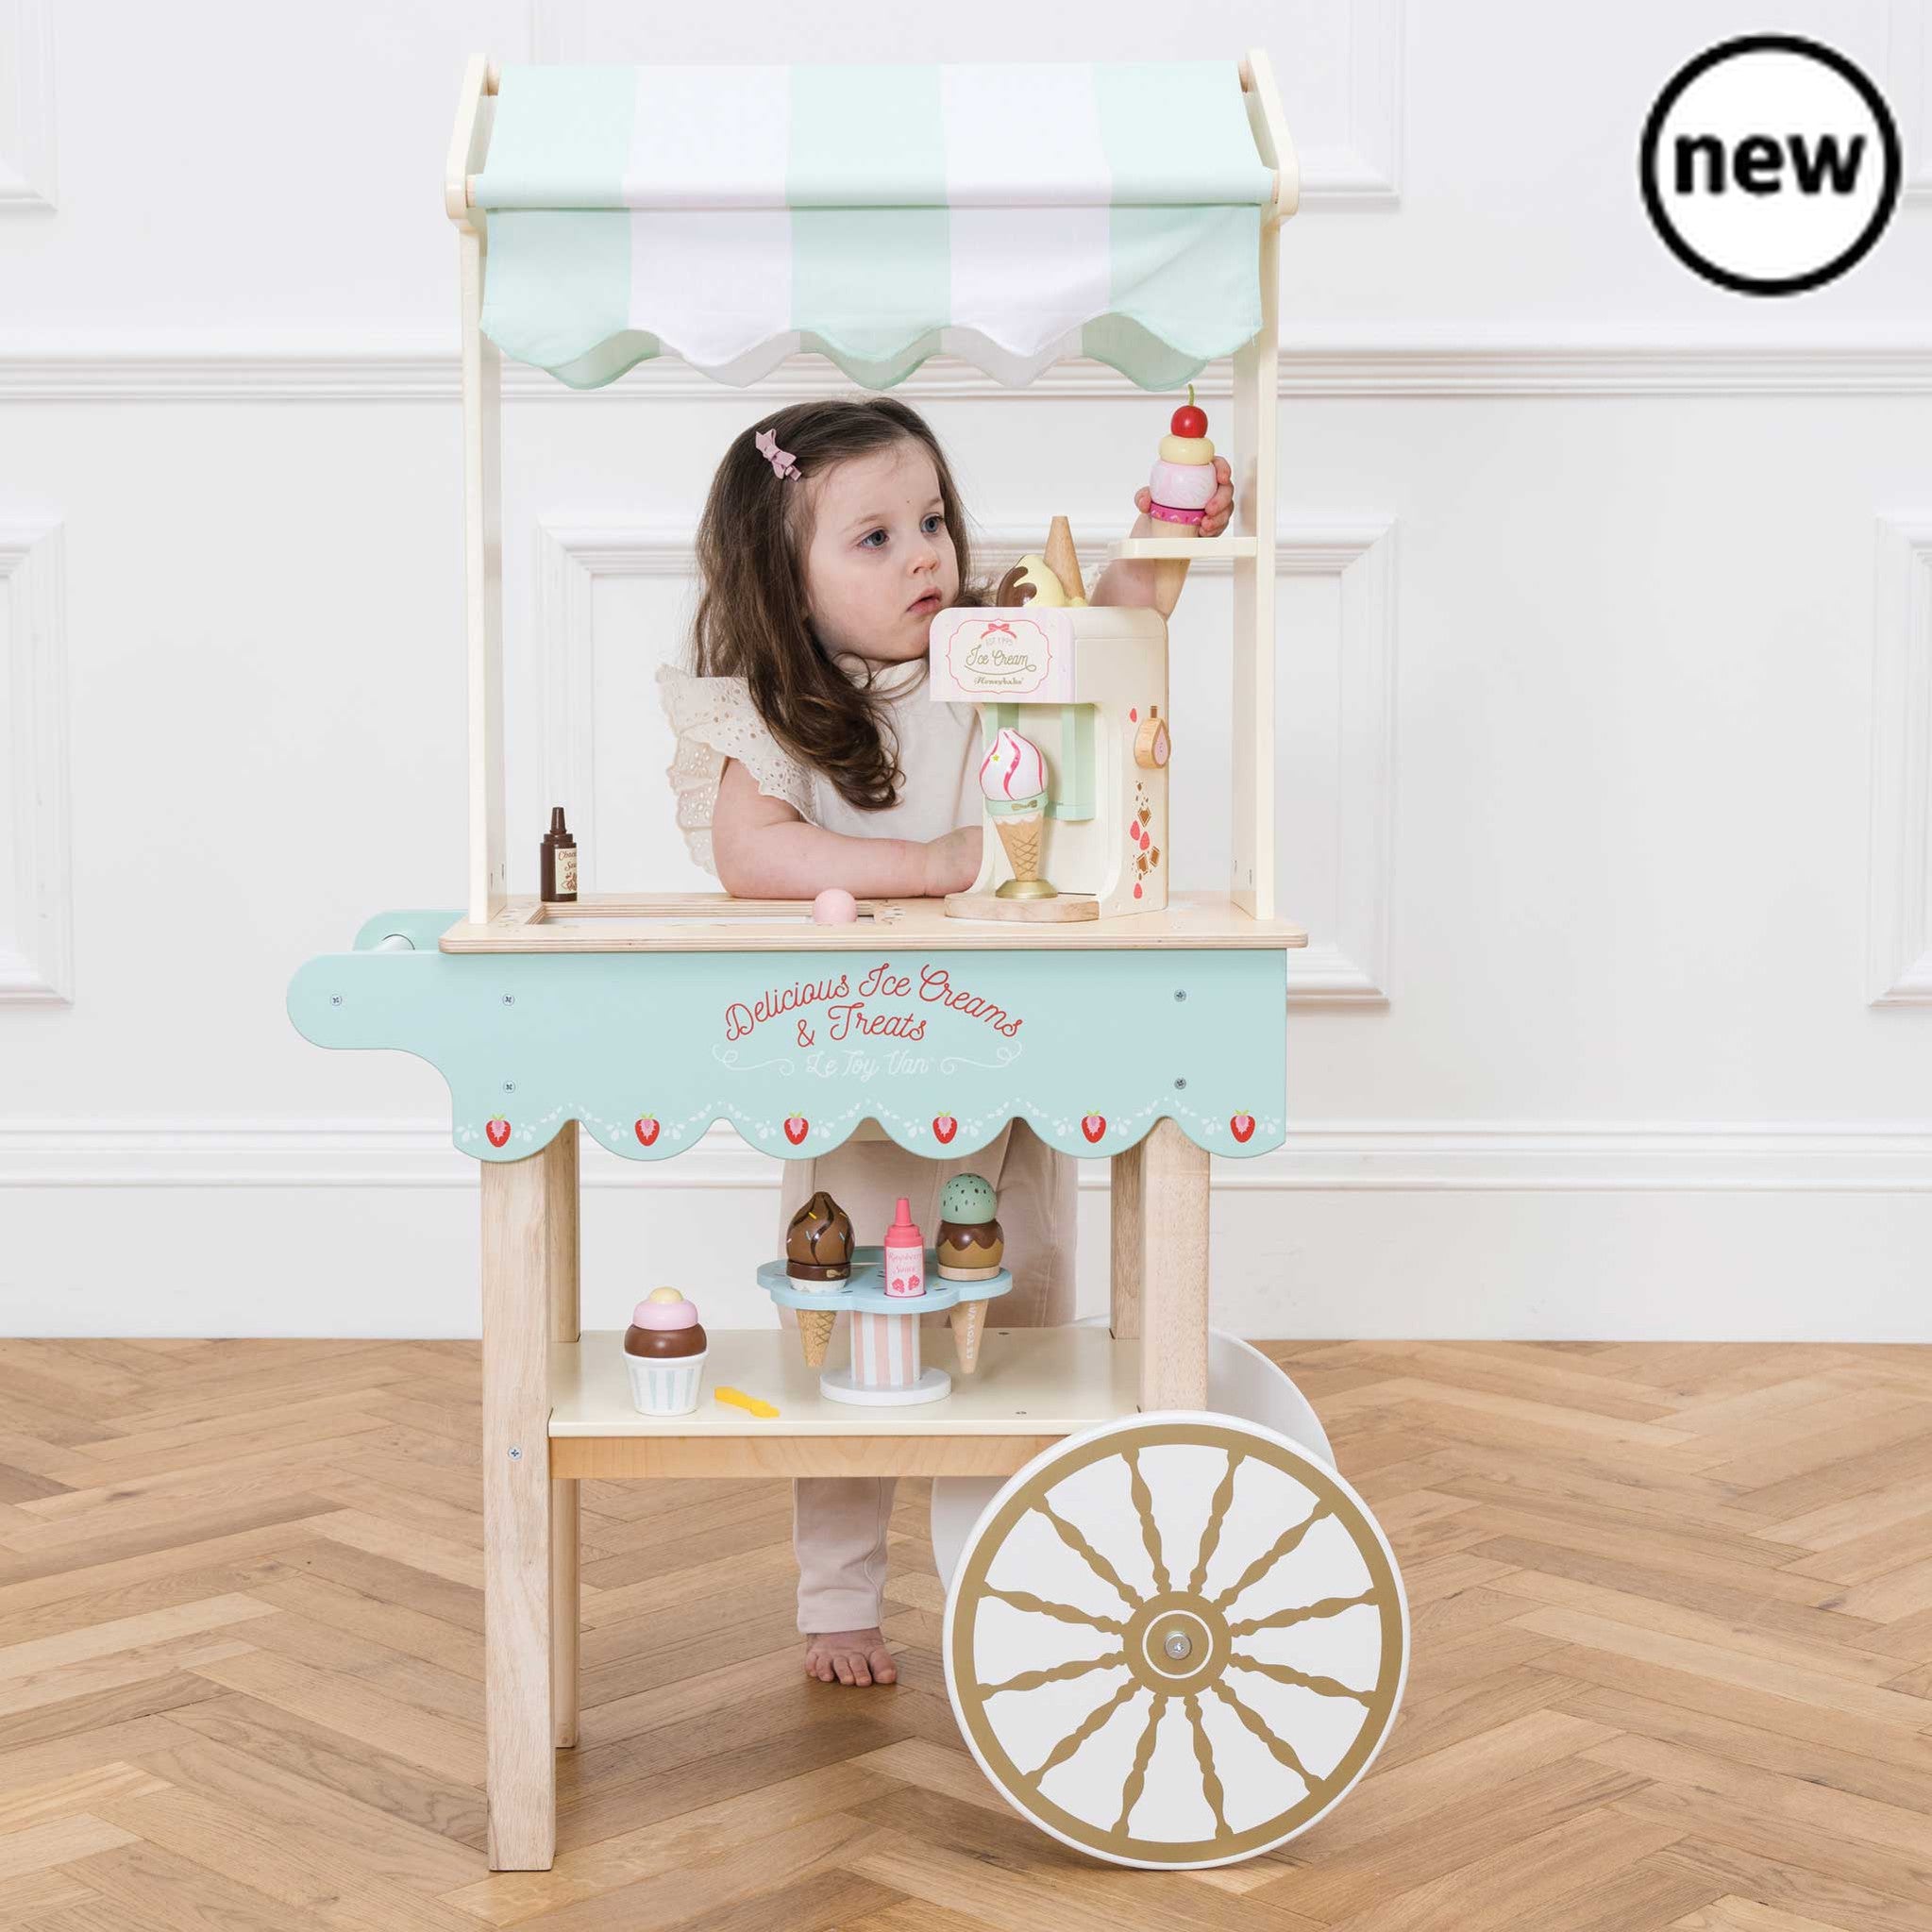 Ice Cream Trolley and Treats, This whimsical Ice-Cream Trolley toy is a nostalgic nod to bygone days and fairs, encouraging both imaginative play and a sense of wonder in children. Key Features Design: The trolley features a barrow style with a classic striped fabric canopy that adds to its vintage allure. Material: Crafted from sustainable wood, this toy is built to last for a lifetime of inspired play. Realistic Features: With an ice compartment featuring a sliding door, the trolley reveals illustrations 